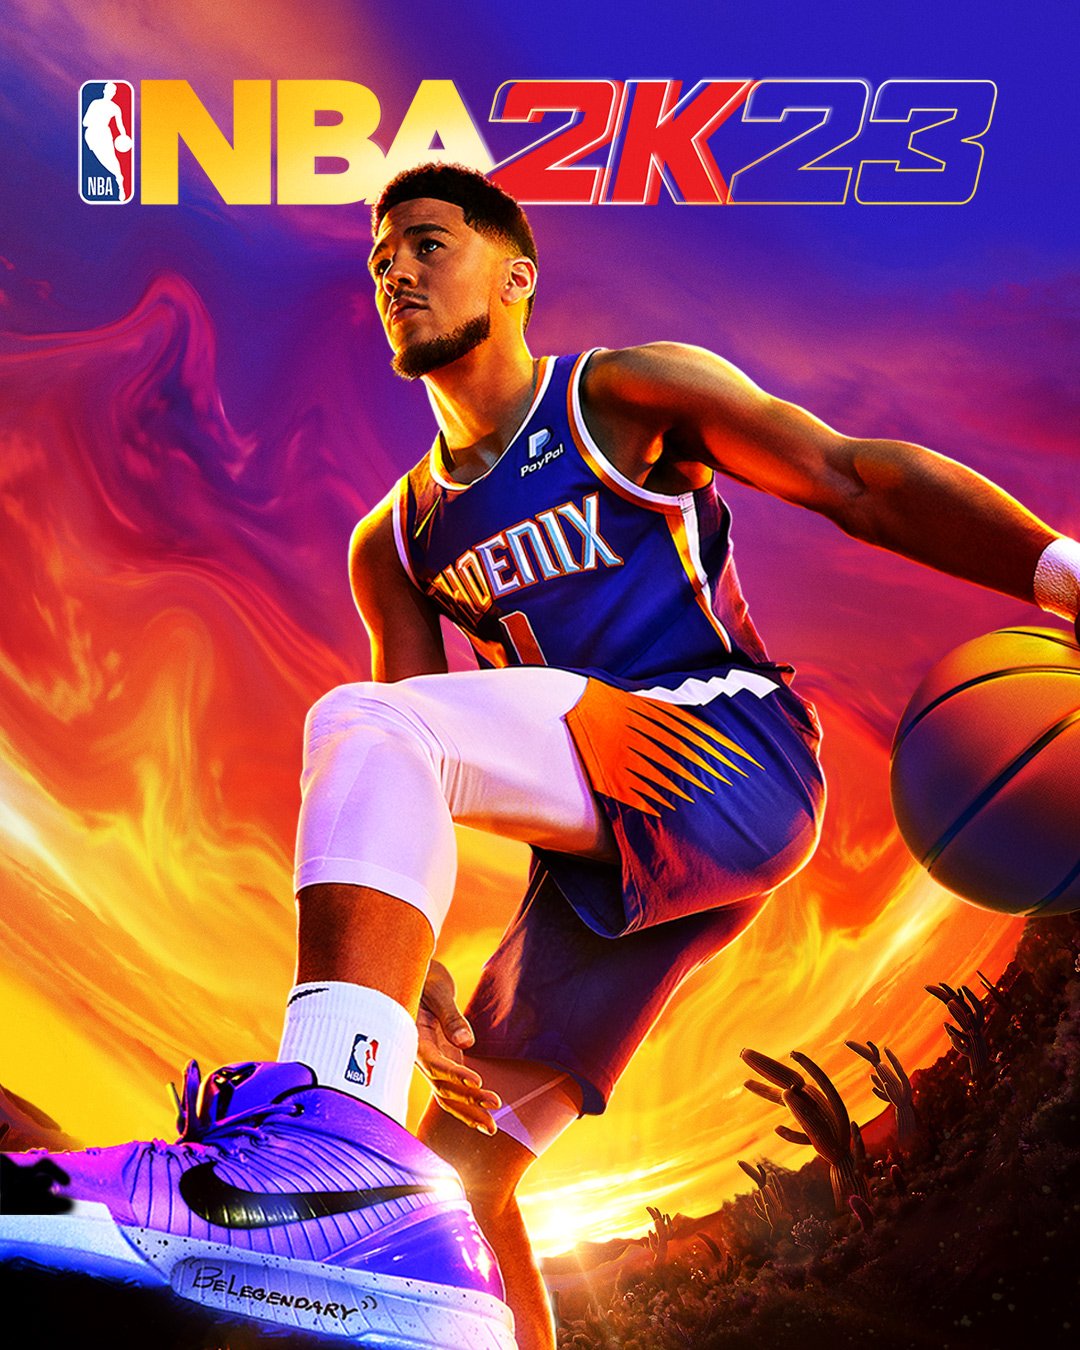 NBA 2K Legendary In #NBA2K23 Introducing Our NBA 2K23 Cover Athlete Pre Order Now